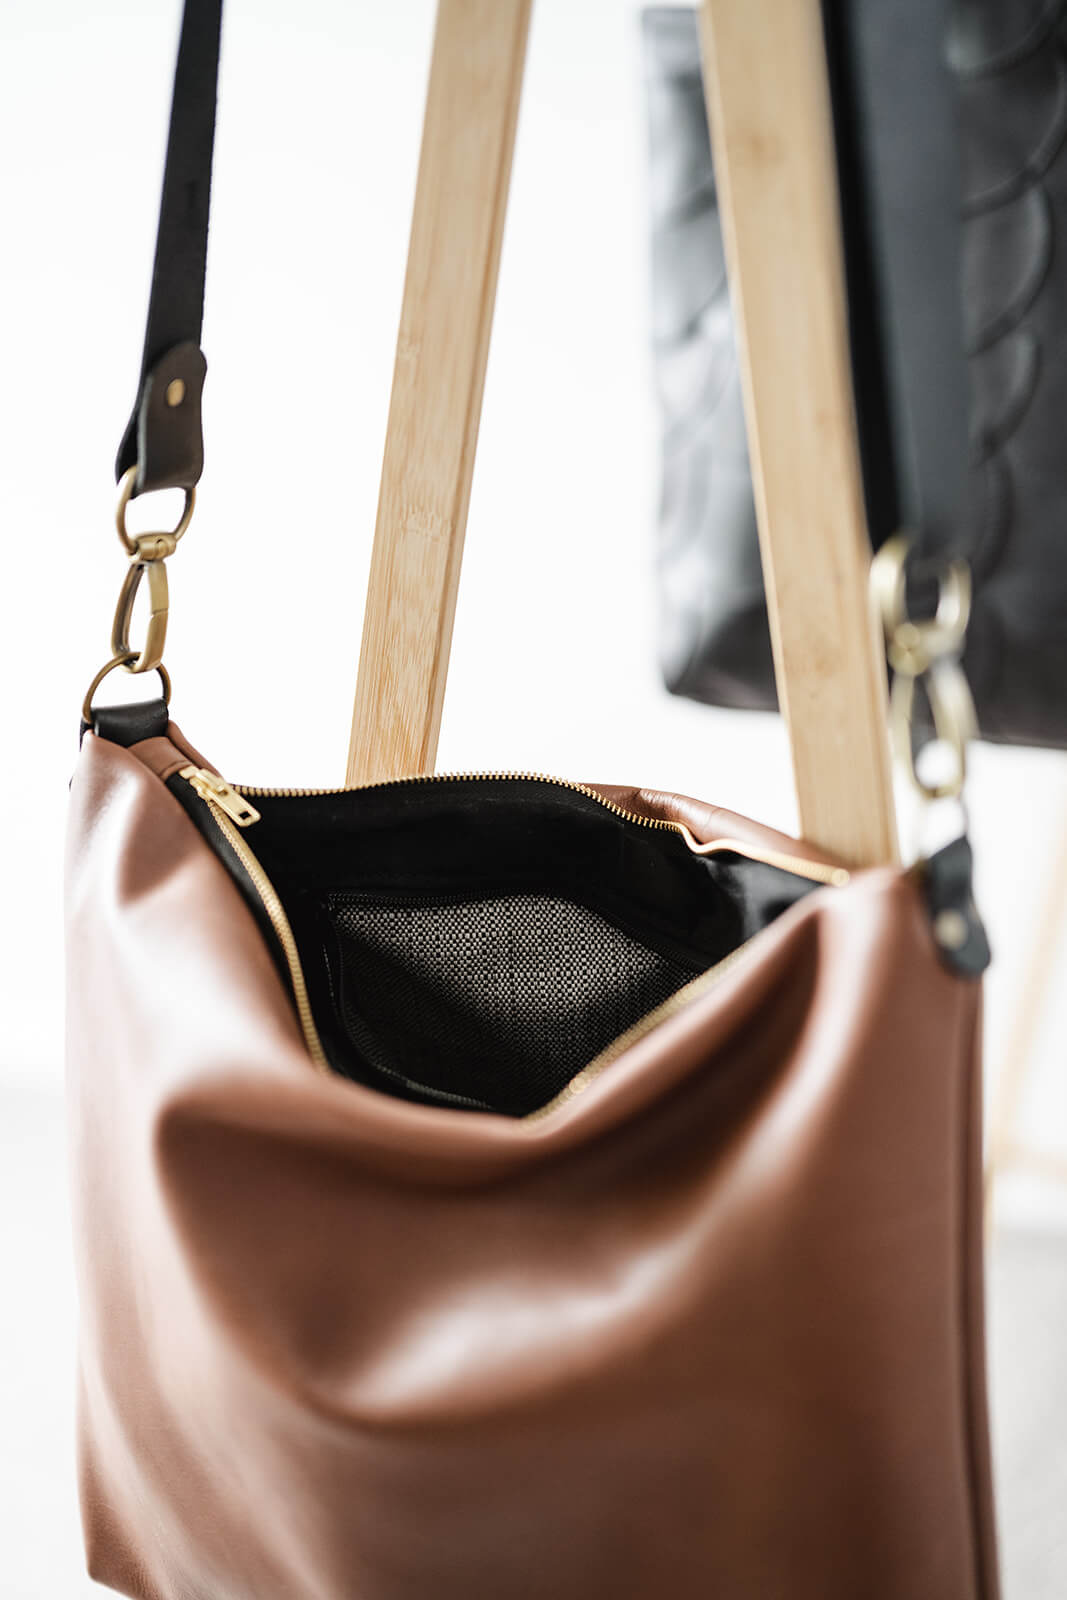 Close up product pic of a tan leather bag showing black strap, antique hardware, black and gold zip, black lining and black and white internal pocket fabric